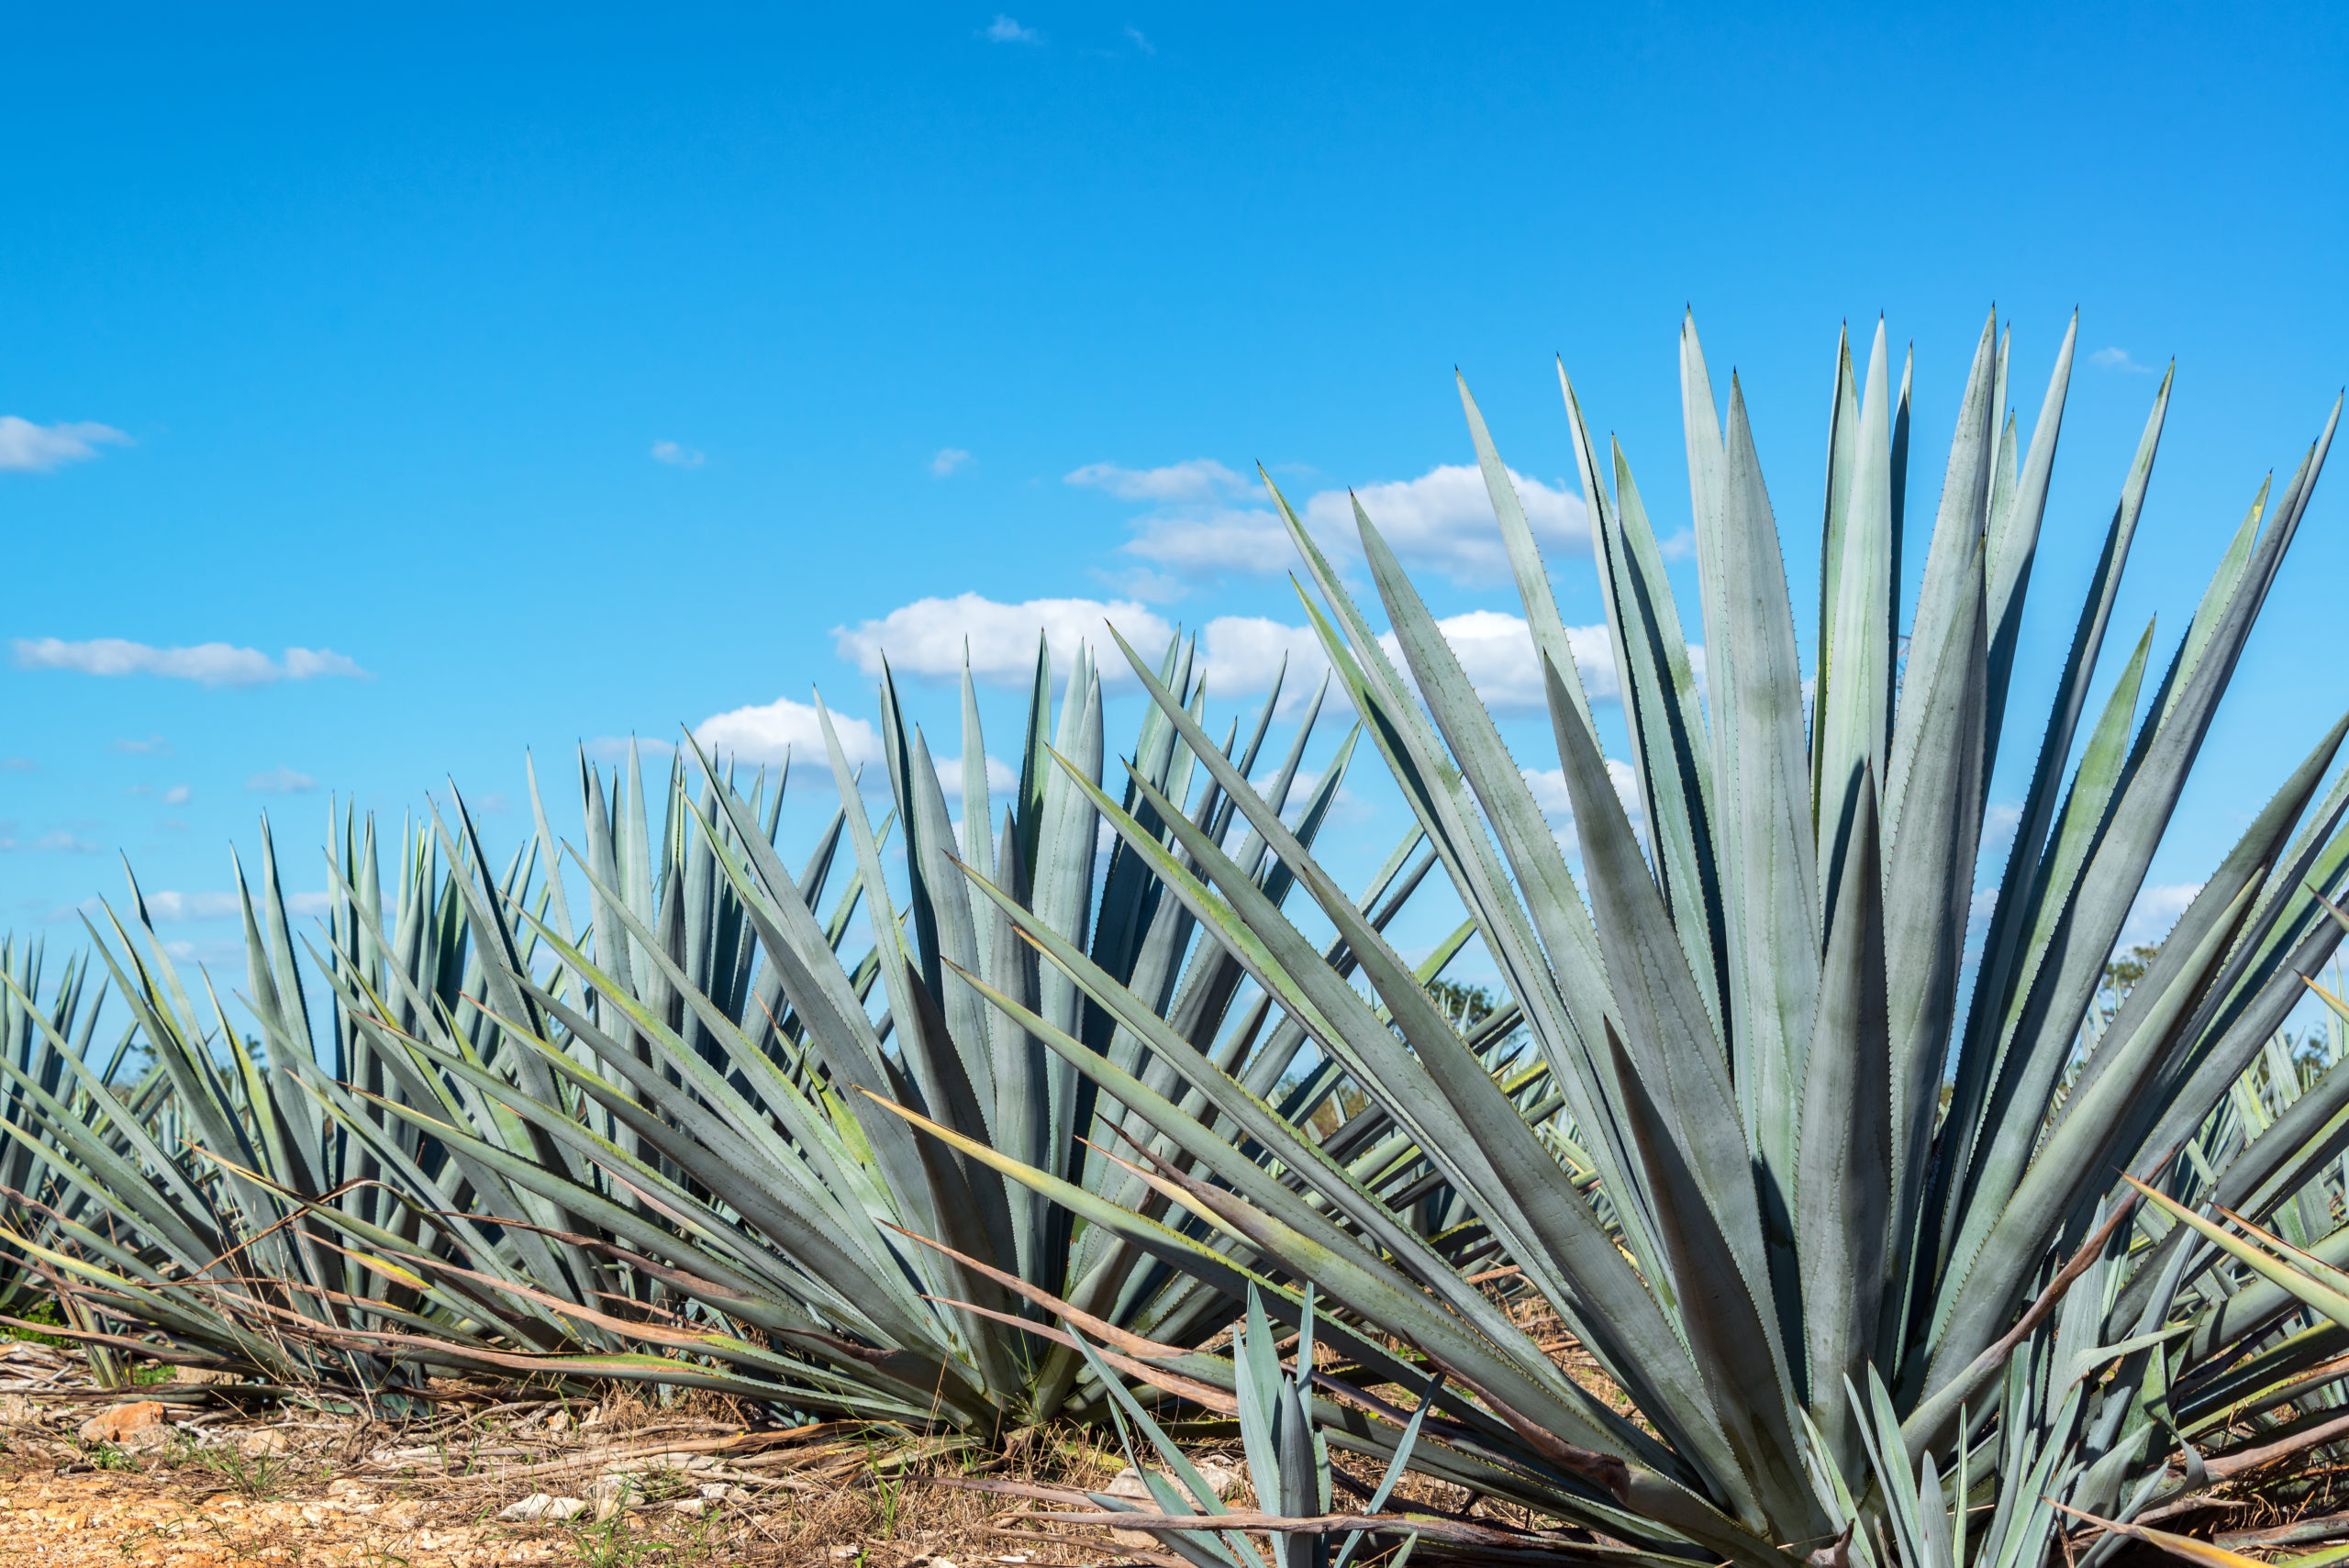 Blue agave plants in Mexico (Photo courtesy of Canción Tequila)